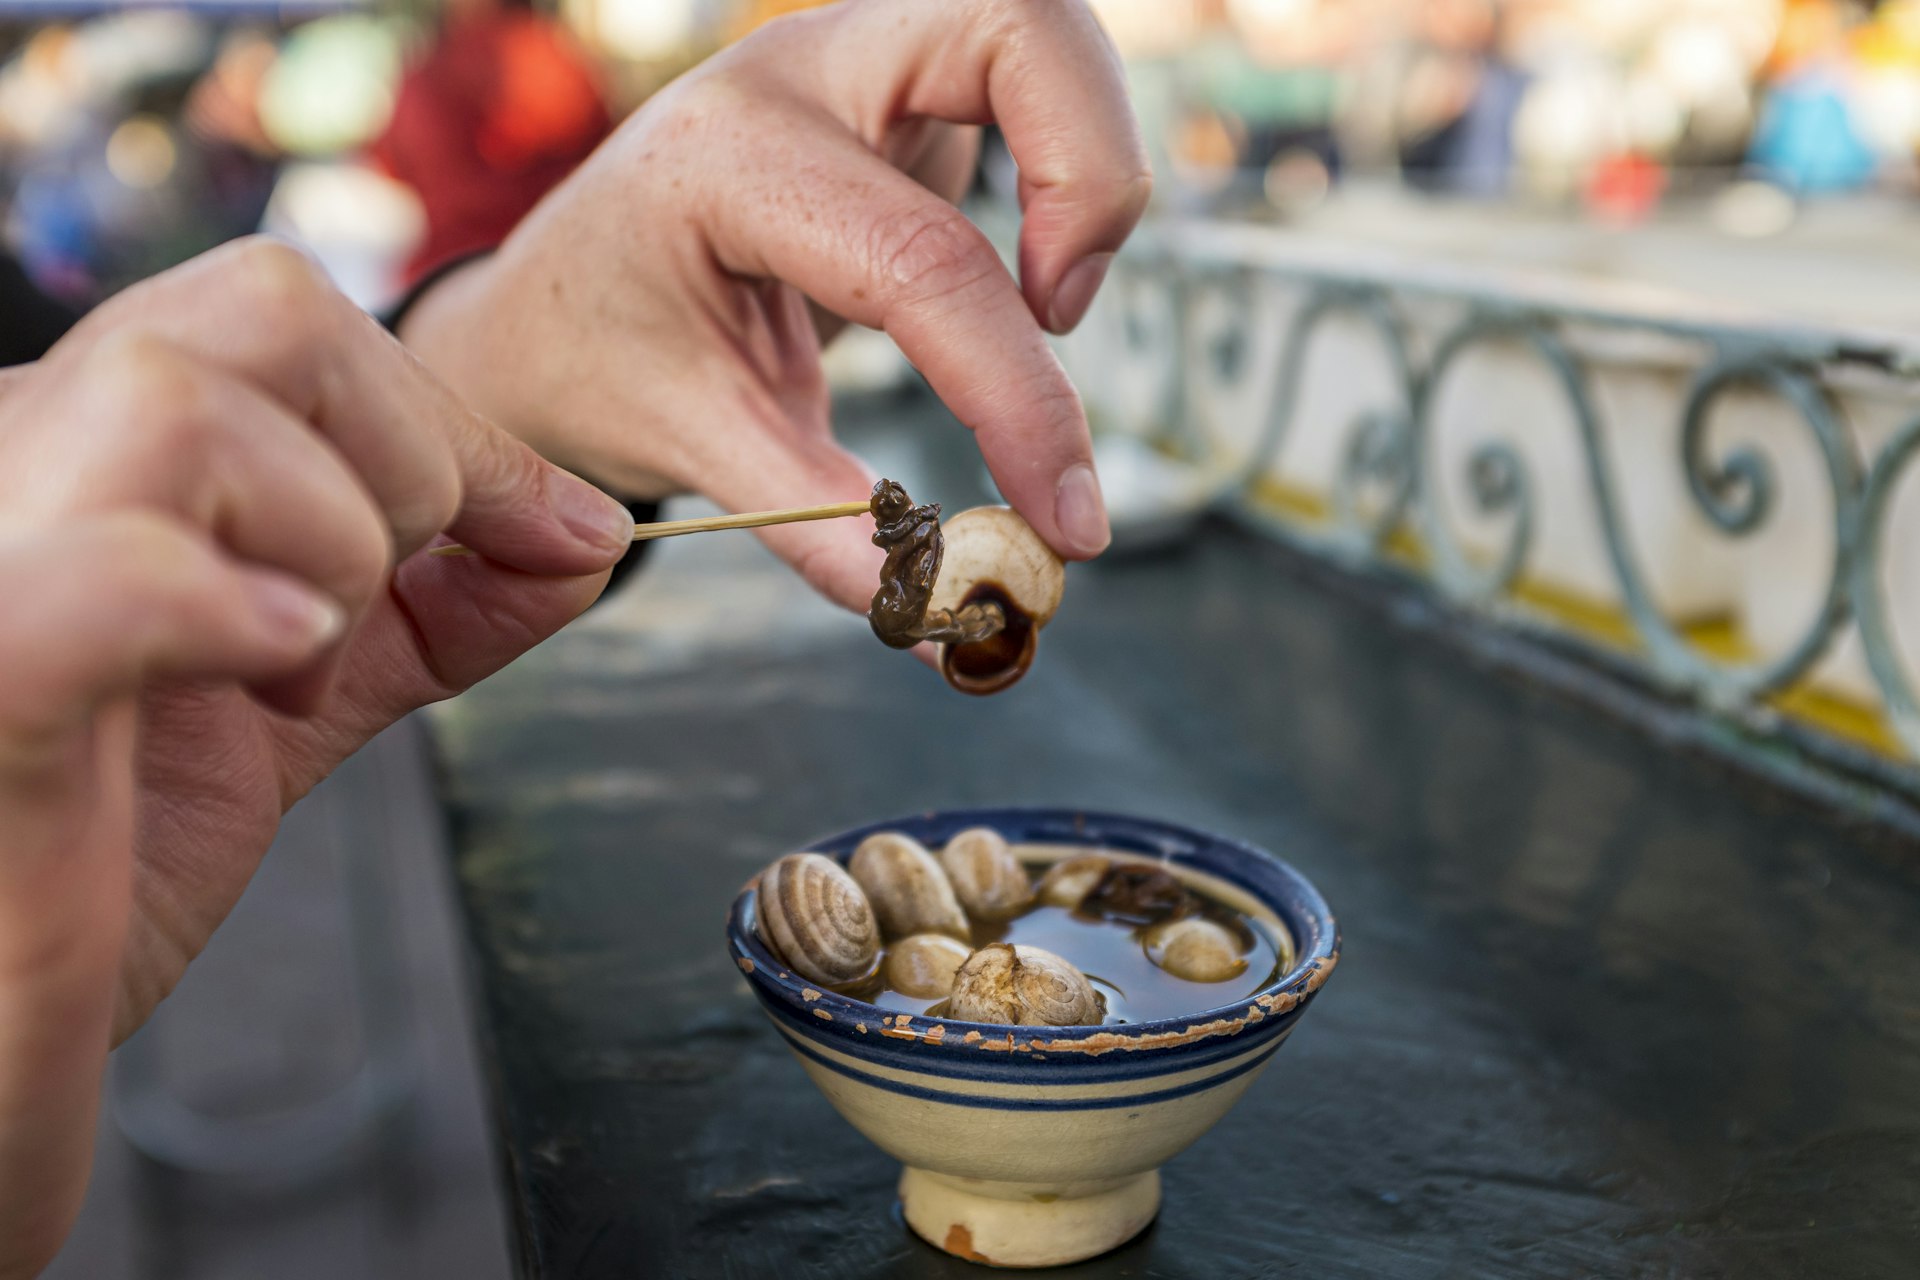 Woman extracting a snail from its shell in a bowl of soup in Morocco